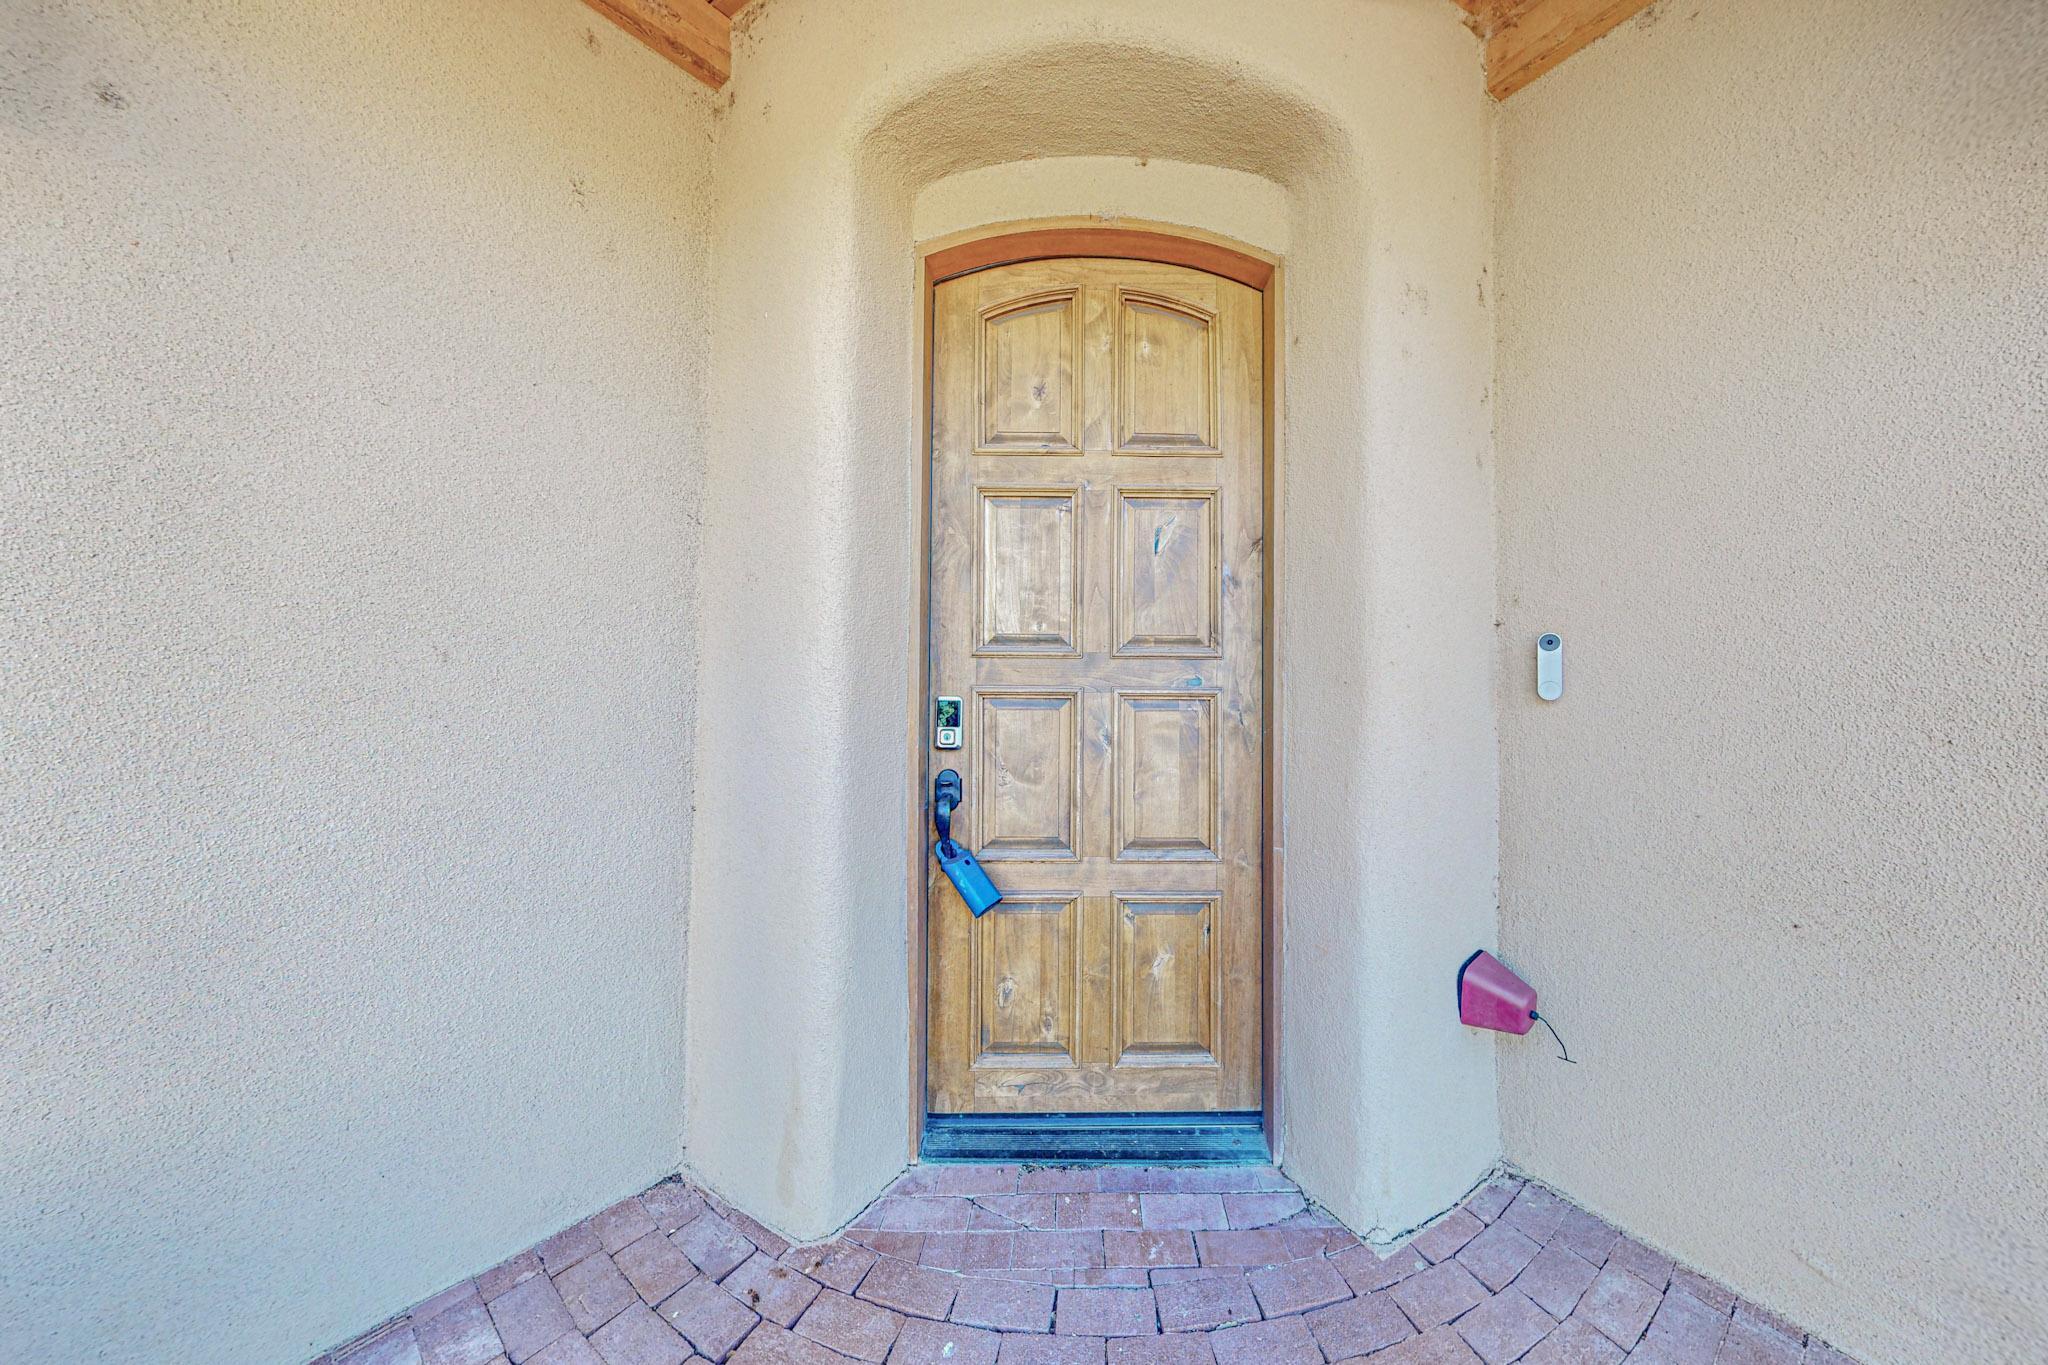 71 Tunnel Springs Road, Placitas, New Mexico 87043, 4 Bedrooms Bedrooms, ,4 BathroomsBathrooms,Residential,For Sale,71 Tunnel Springs Road,1061537